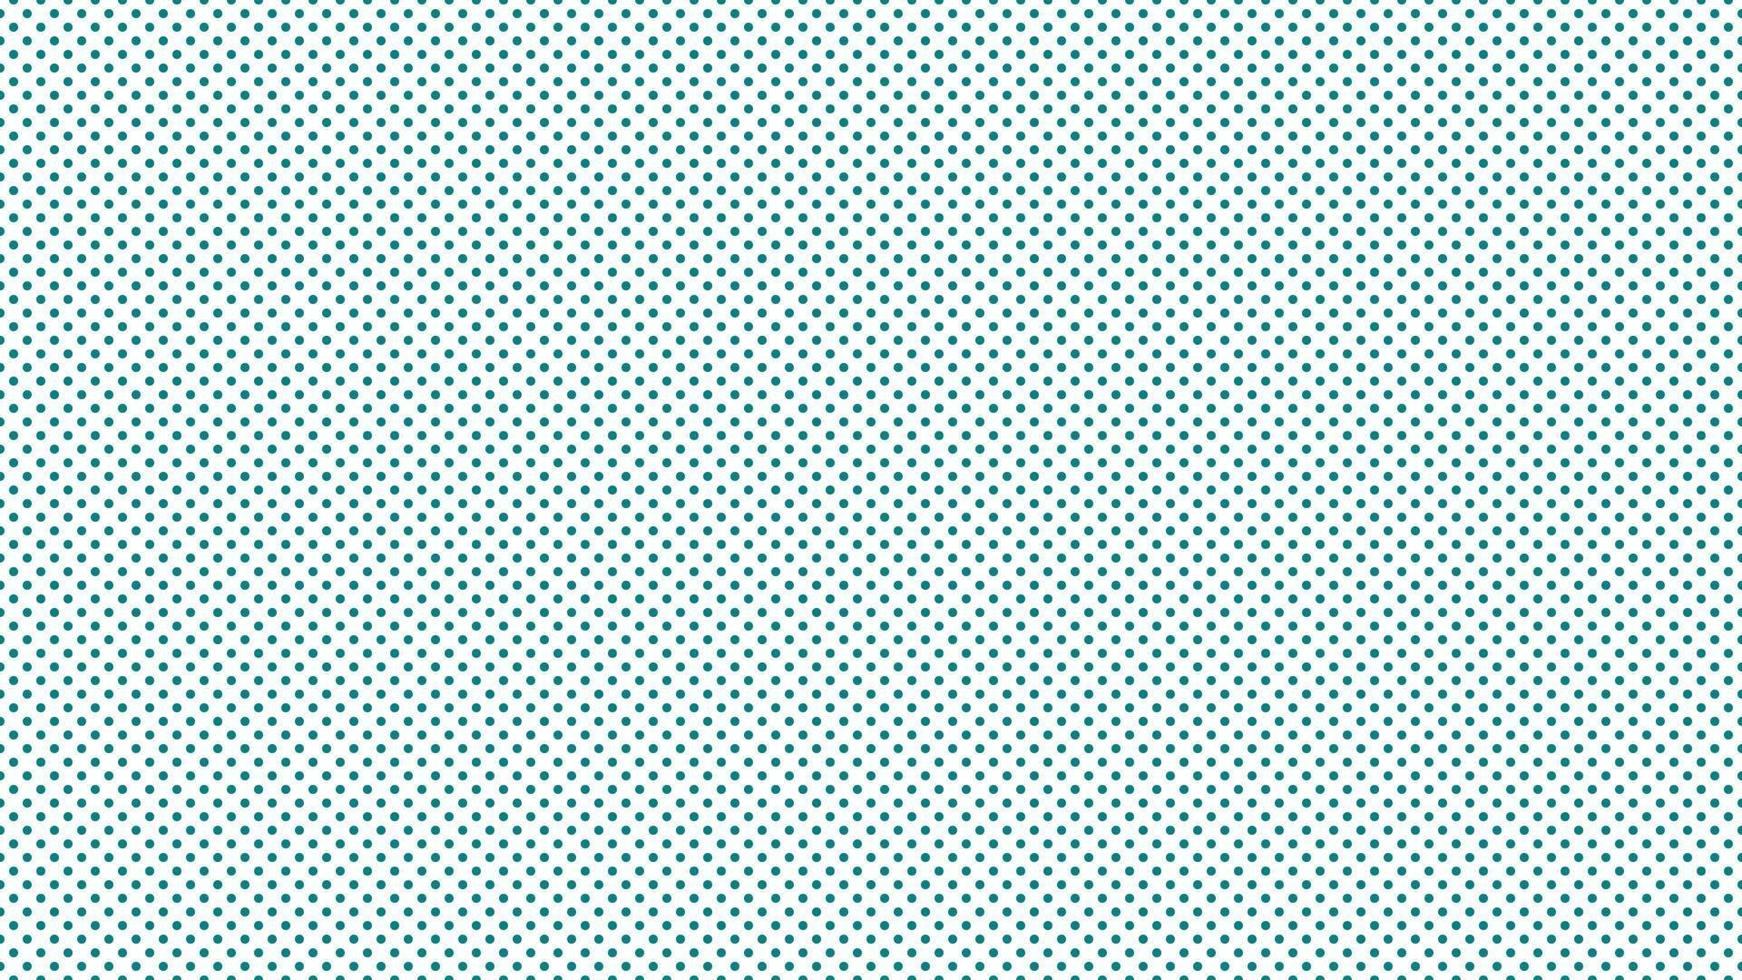 teal cyan color polka dots background vector